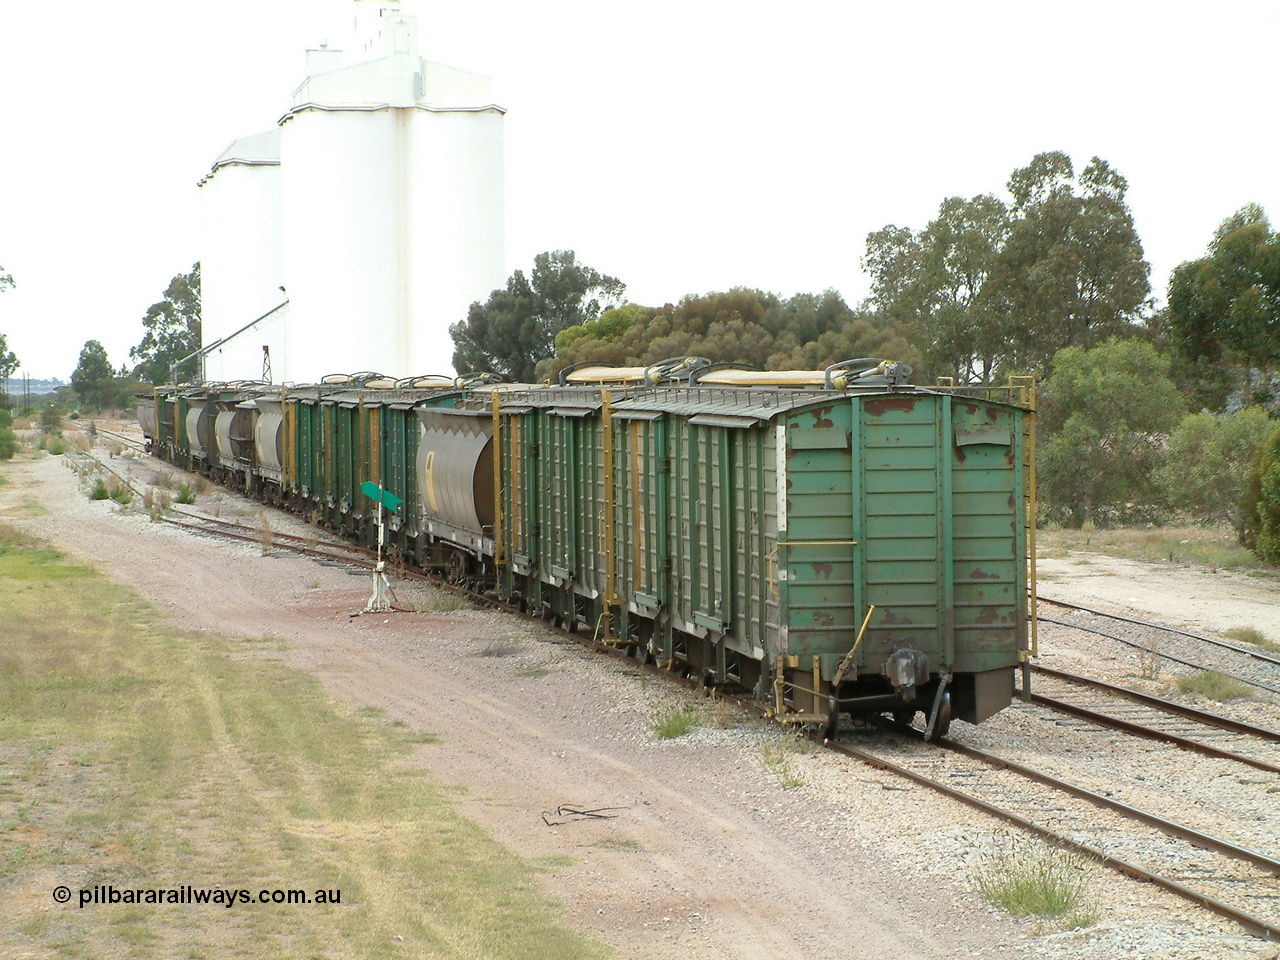 030407 100652
Minnipa, the rear portion left on the mainline as some waggons are shunted into the siding. It consists of 2 ENHV, 1 HAN, 3 ENHV, 1 HAN, 1 HBN, 1 HAN, 1 ENHG, 1 HAN, 1 ENHV, 1 HBN, 1 NHV and 2 HCN class bringing up the rear. 7th April 2003.
Keywords: ENBA-type;ENHV-type;Societe-Gregg-de-Europ;NVD-type;